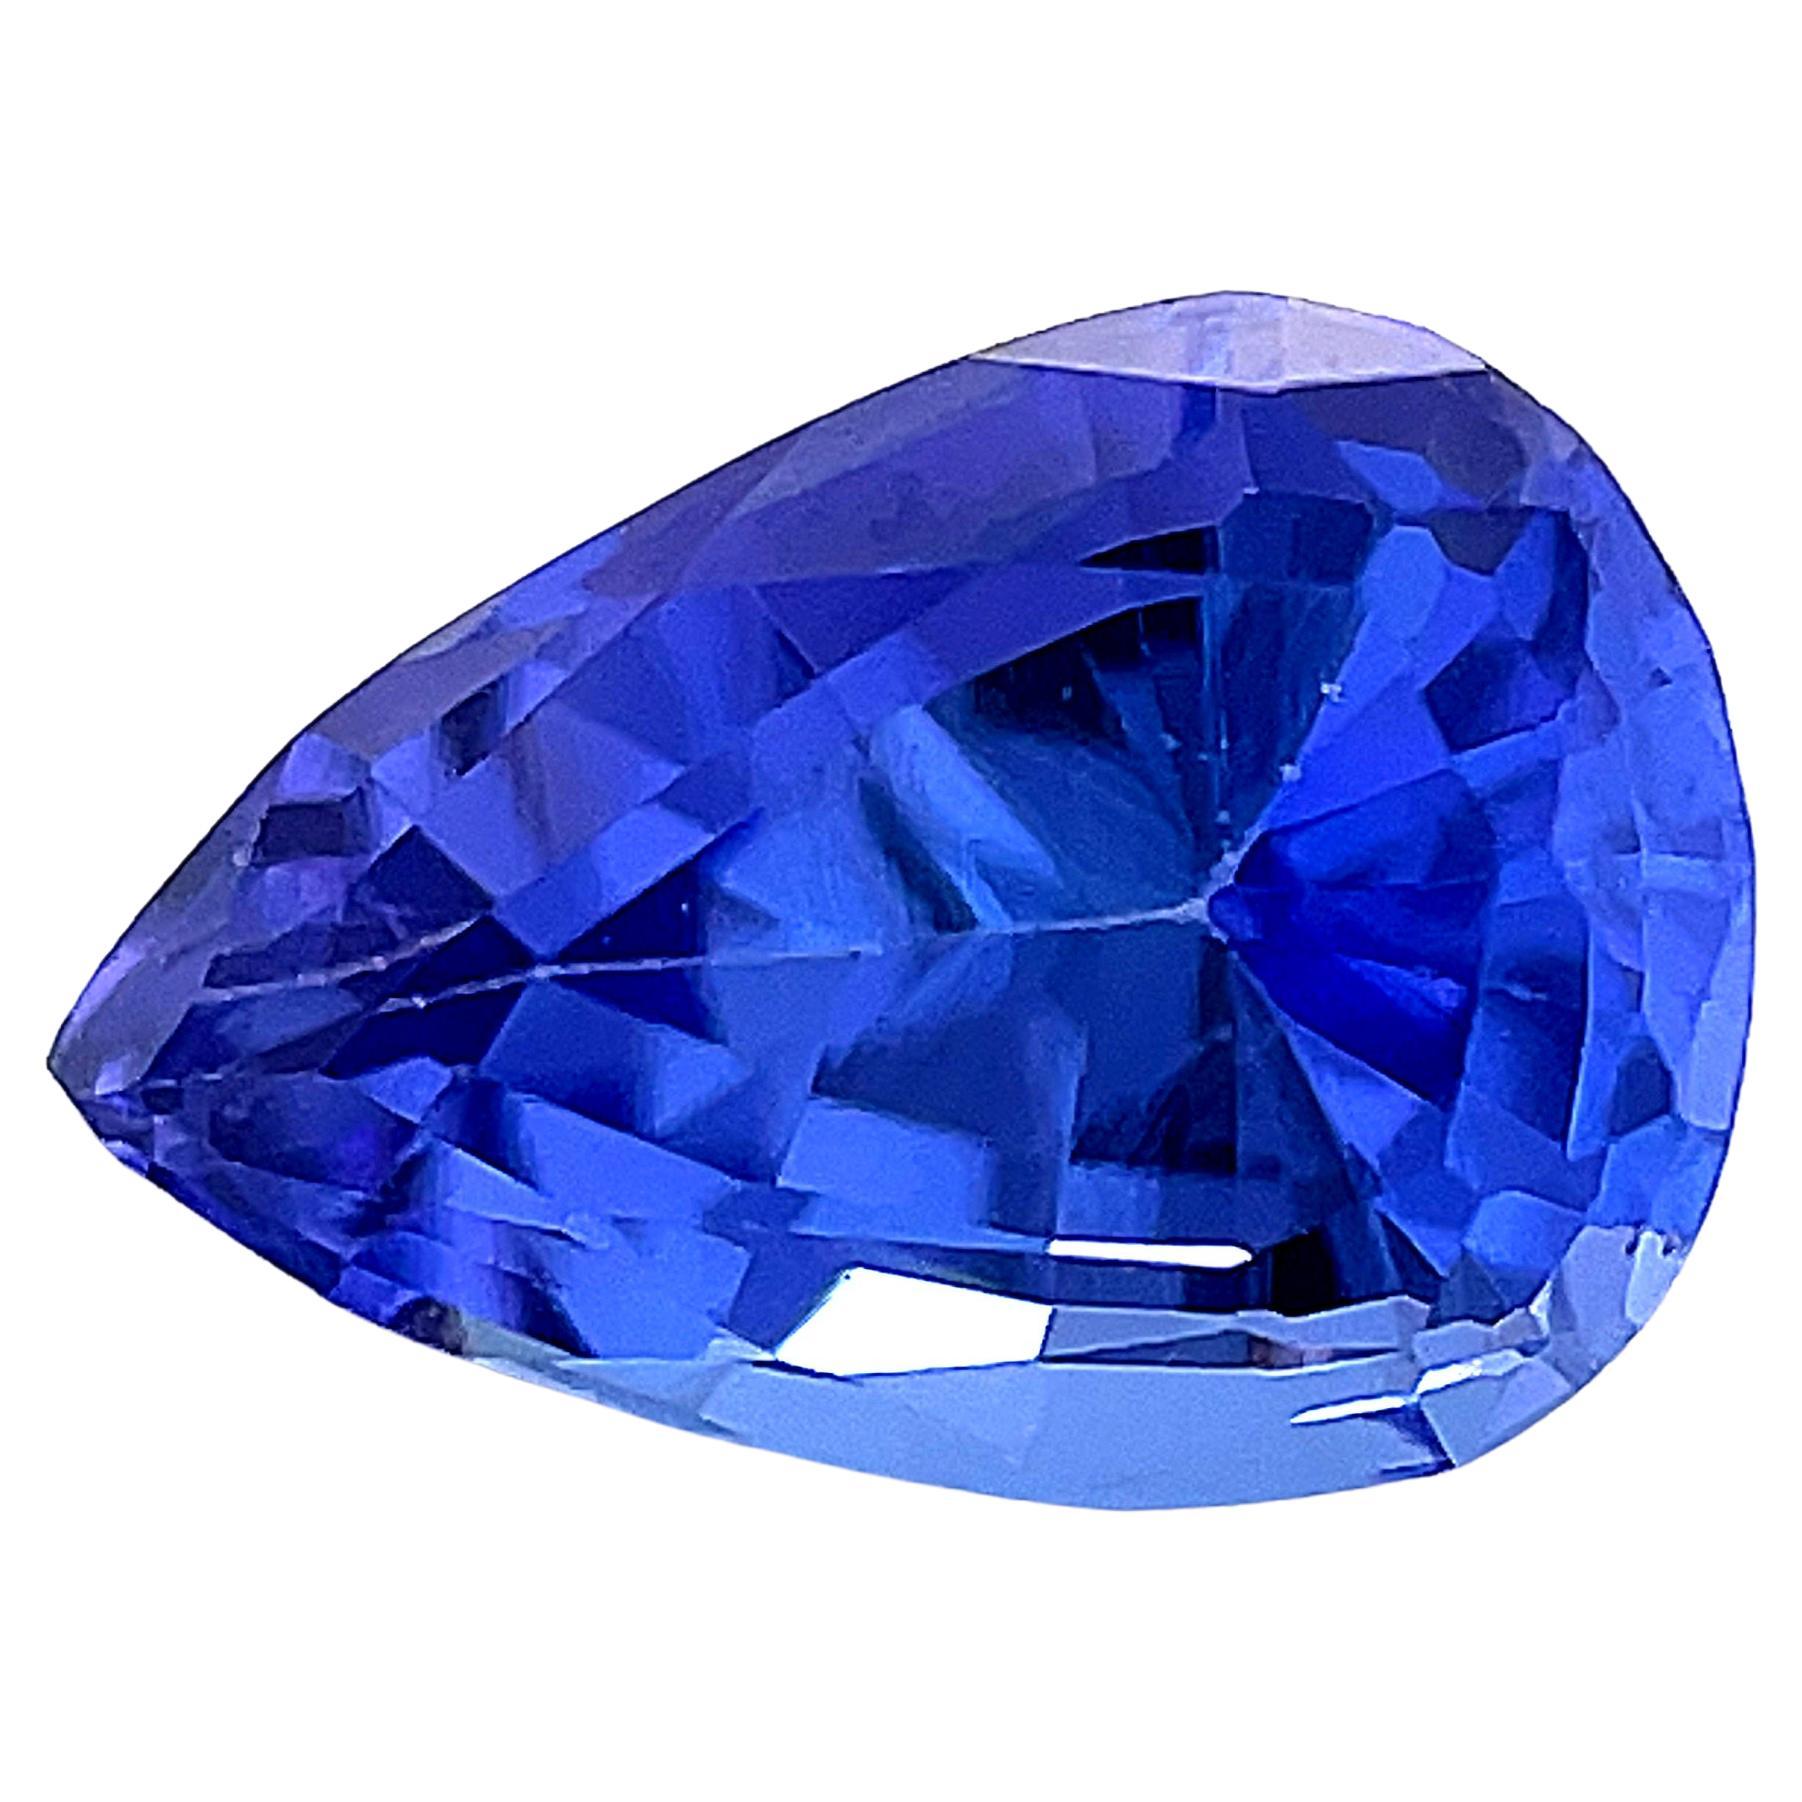 This 1.32 carat pear-shaped tanzanite is a real beauty! It has classic bluish violet color and a depth of color that is generally only seen in much larger stones. Measuring 8.56 x 5.88 millimeters, this gem is a beautifully proportioned pear shape